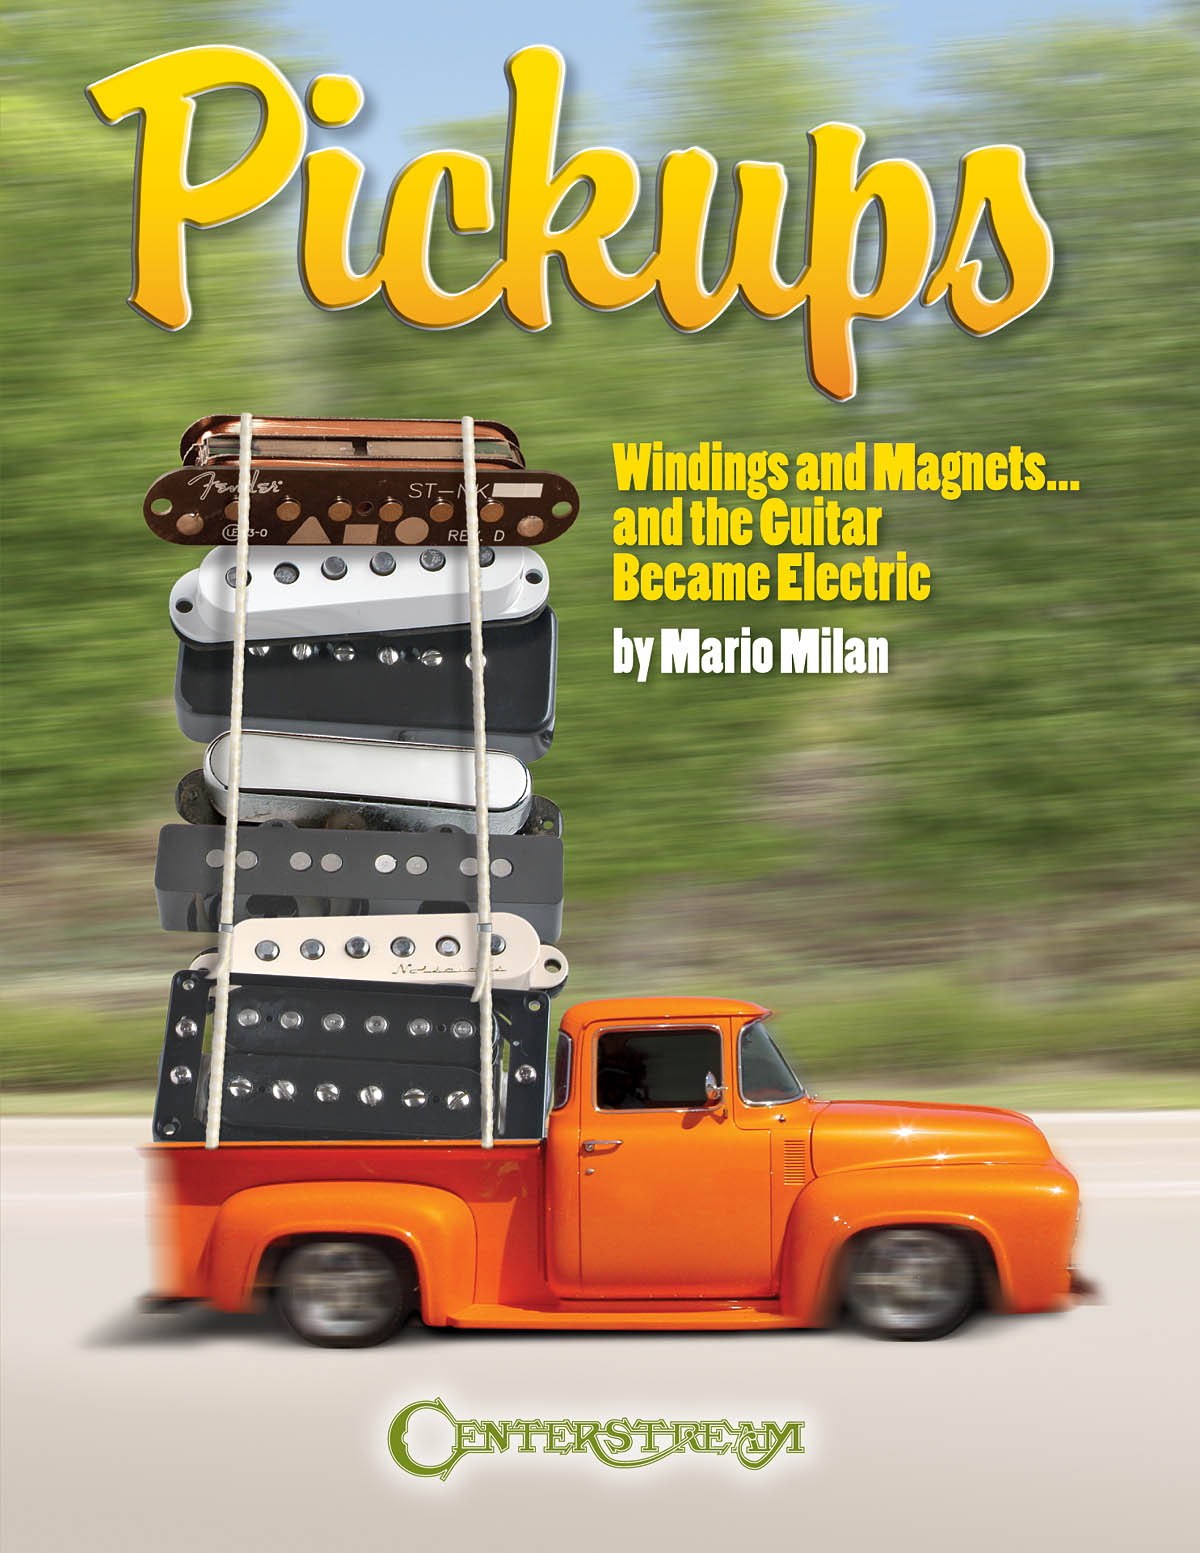 Pickups  Windings and Magnets: Reference Books